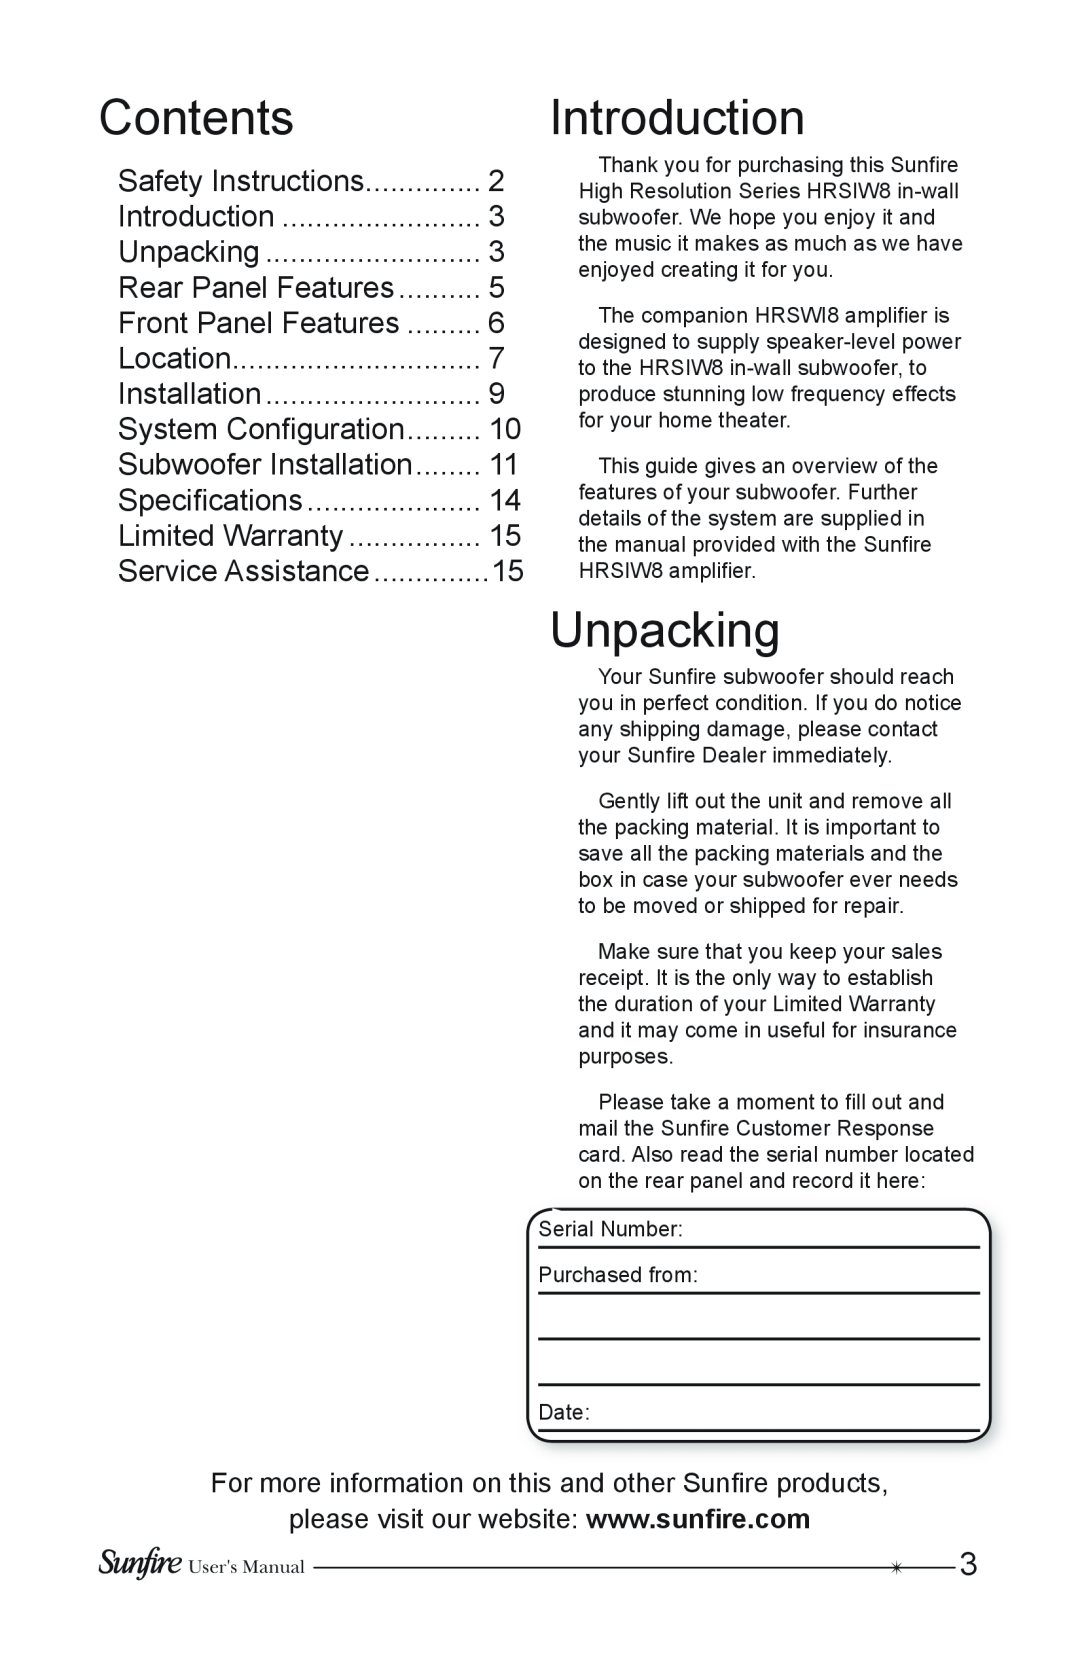 Sunfire HRSIW8 user manual Contents, Introduction, Unpacking 